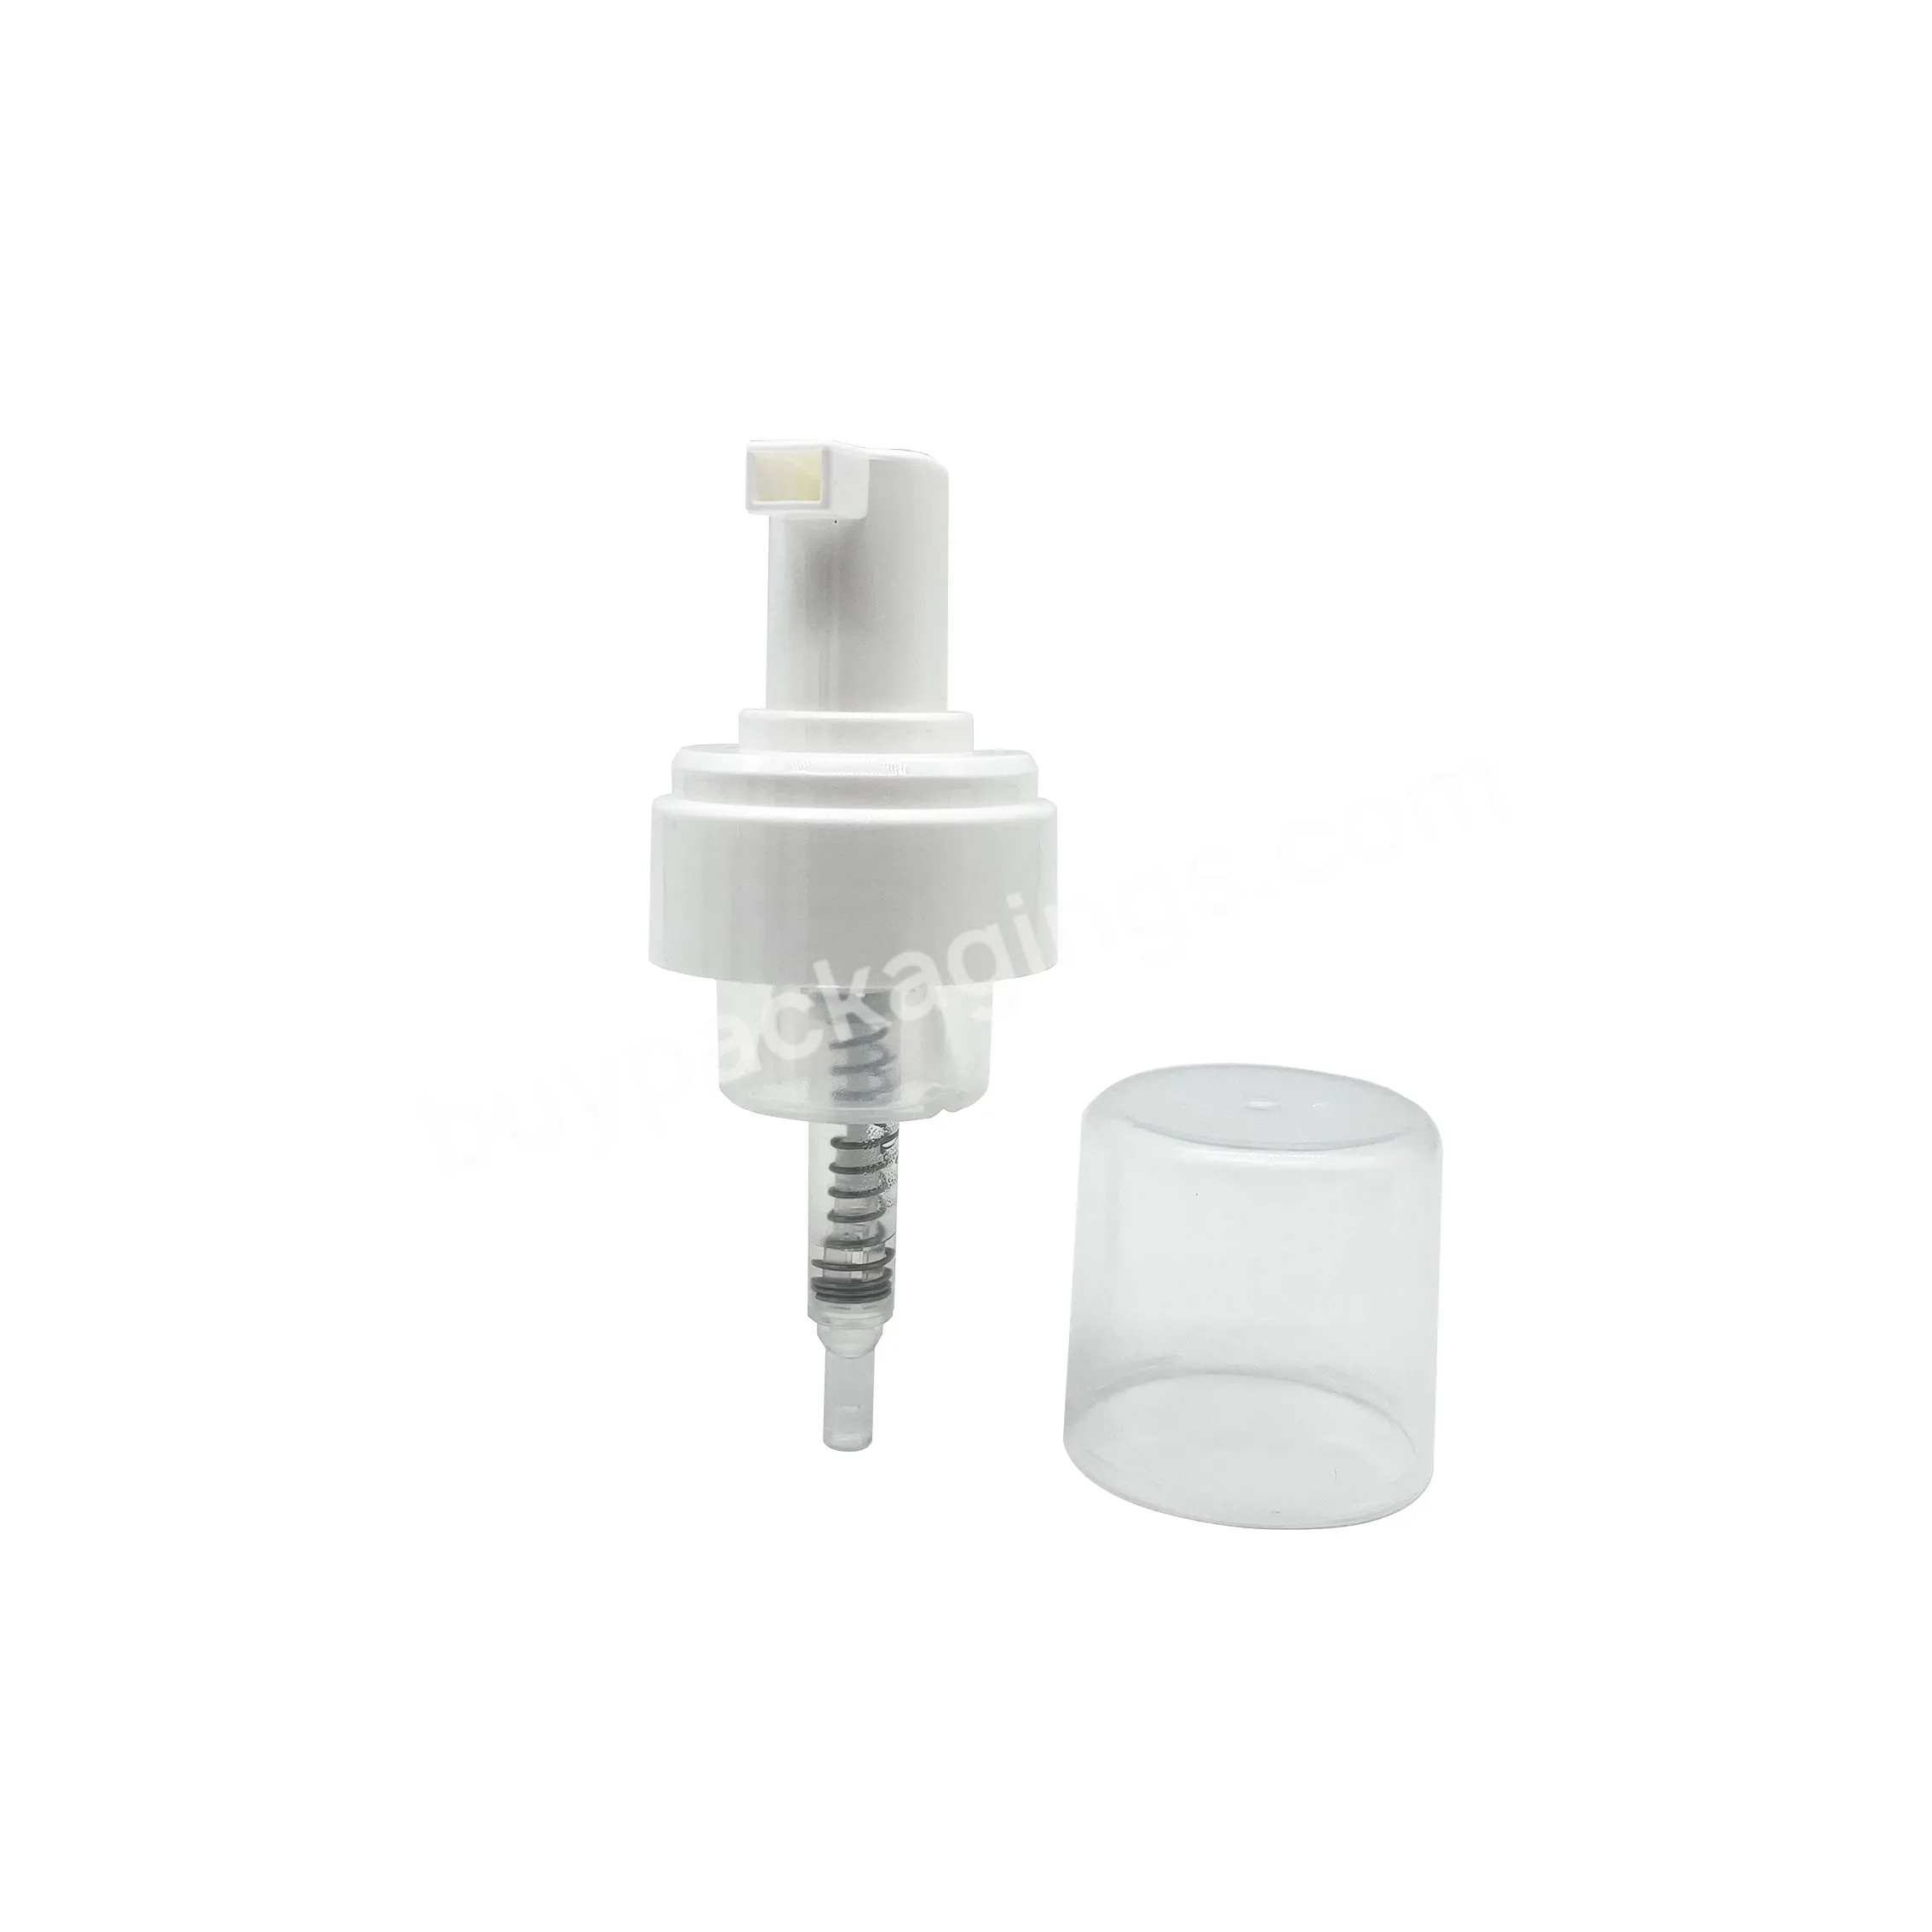 White 42mm 43mm Foam Pump With Clear Frost Cover Lid For Cosmetic Shampoo Soap Bottles - Buy 42mm Pp Foam Pump Dispenser,Pp Foam Soap Pump,Foam Pump With Frost Lid.